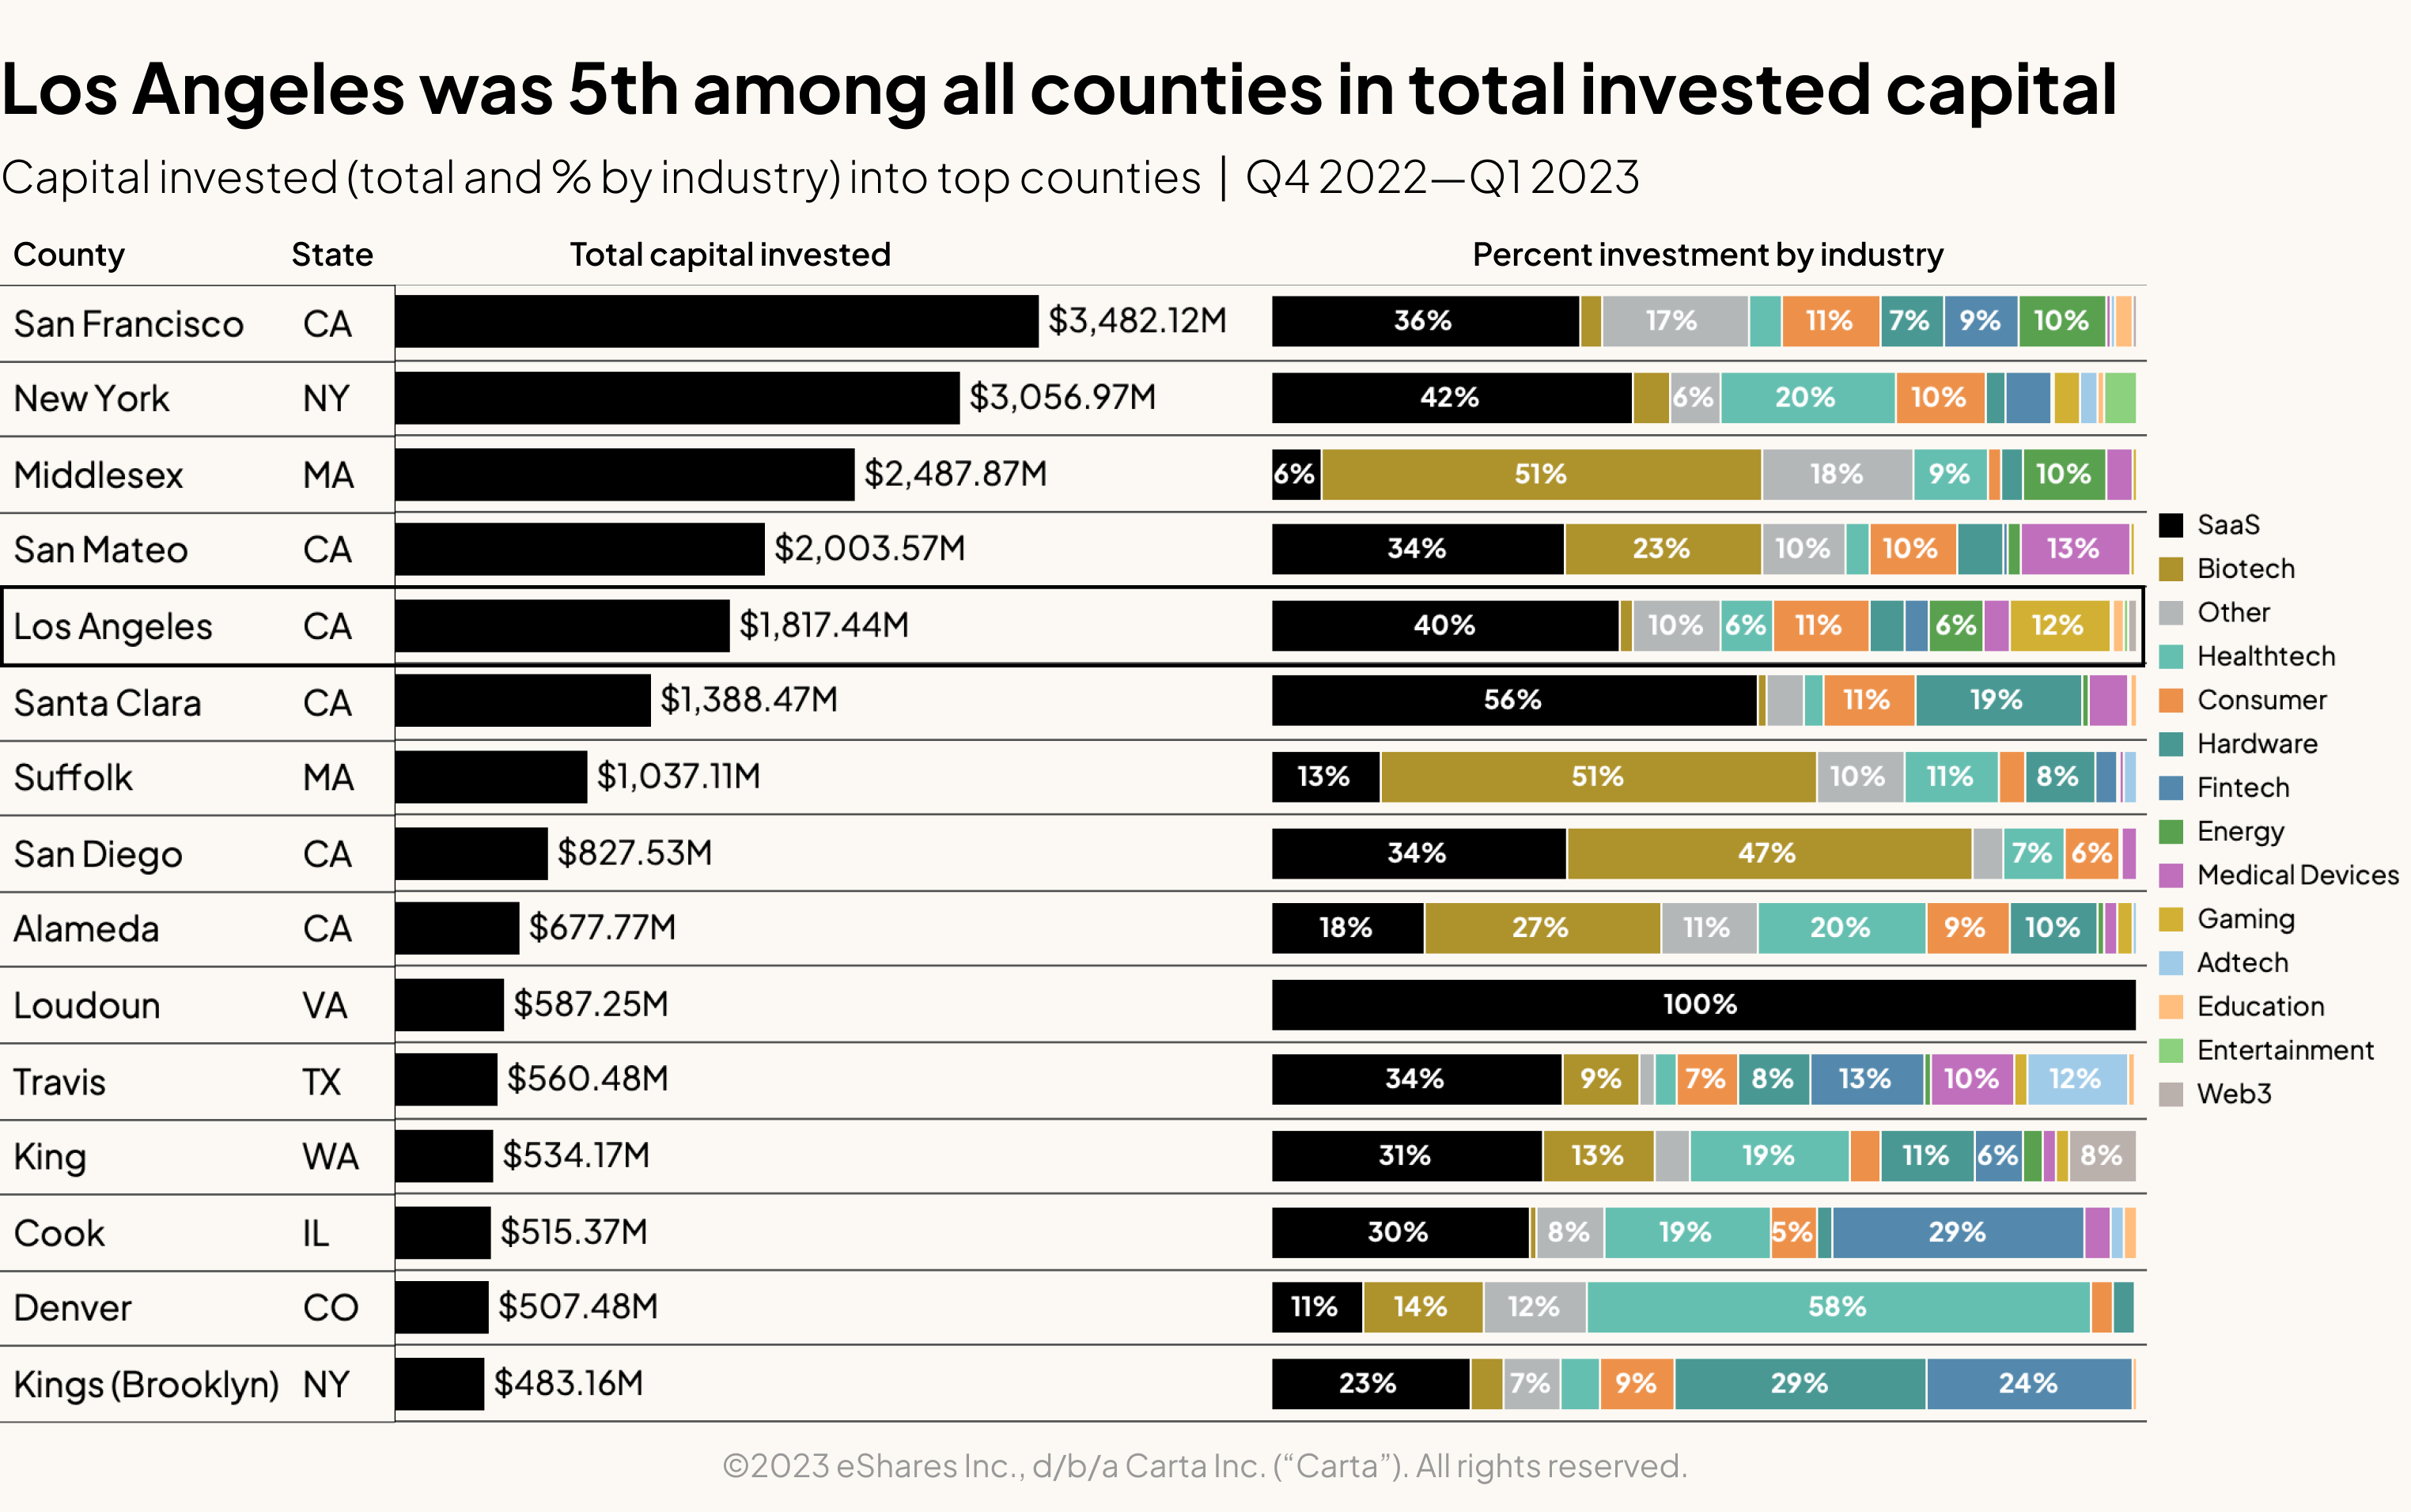 Los Angeles was 5th among all counties in total invested capital